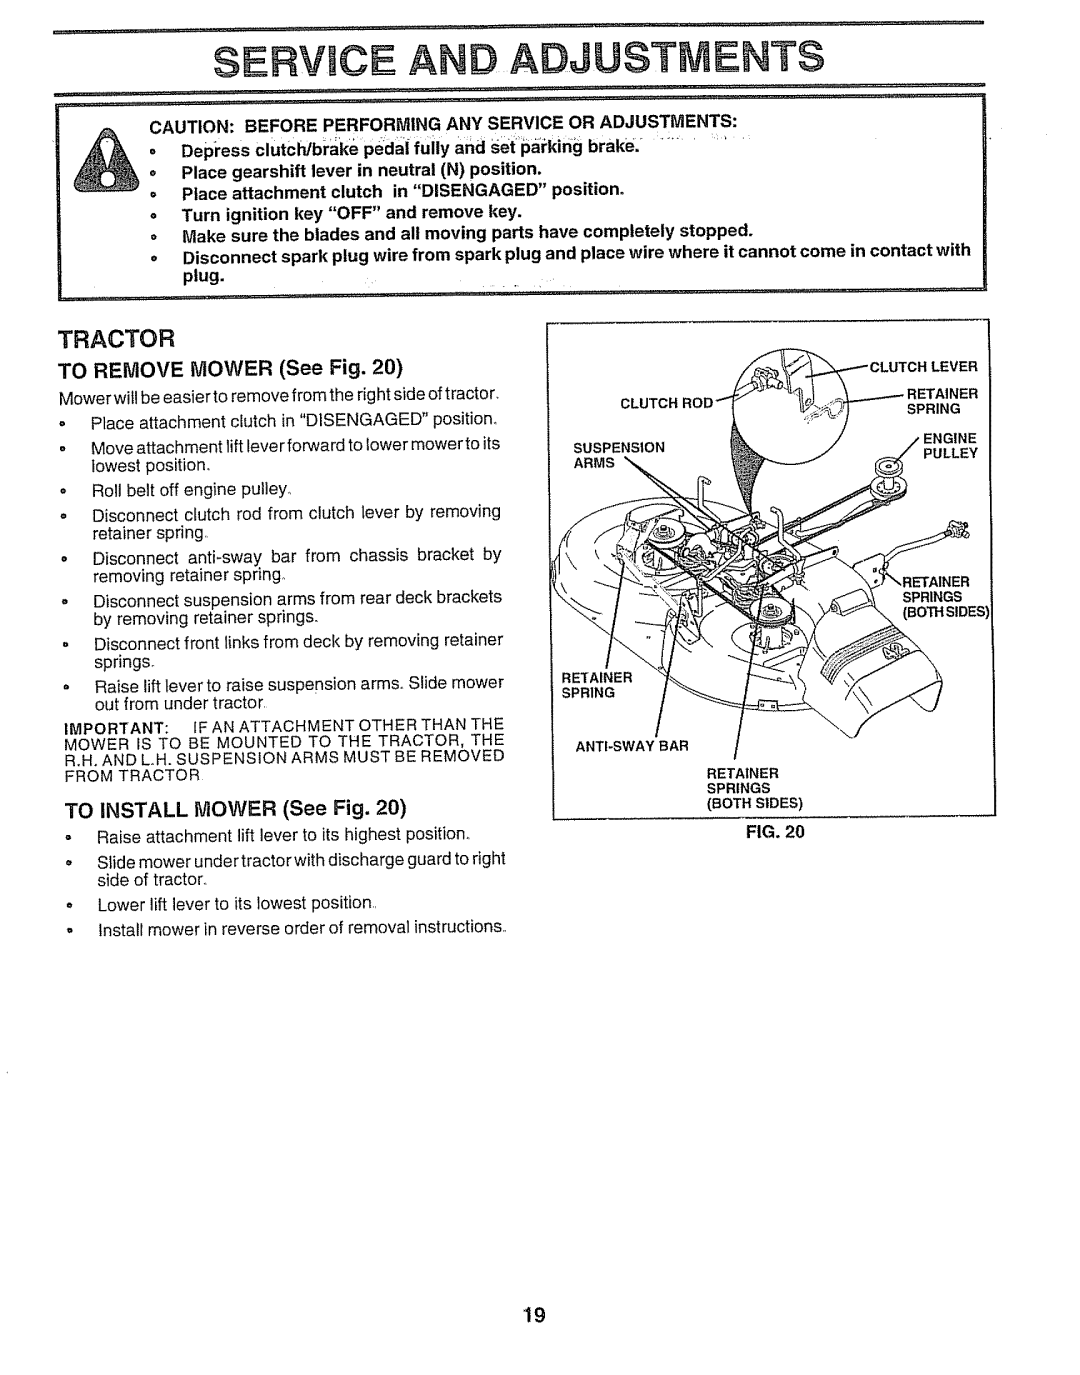 Sears 917.257552 $Ervuce Andadjustments, Tractor, TO REMOVE MOWER See Fig, TO INSTALL MOWER See Fig, Depress clutch/brake 